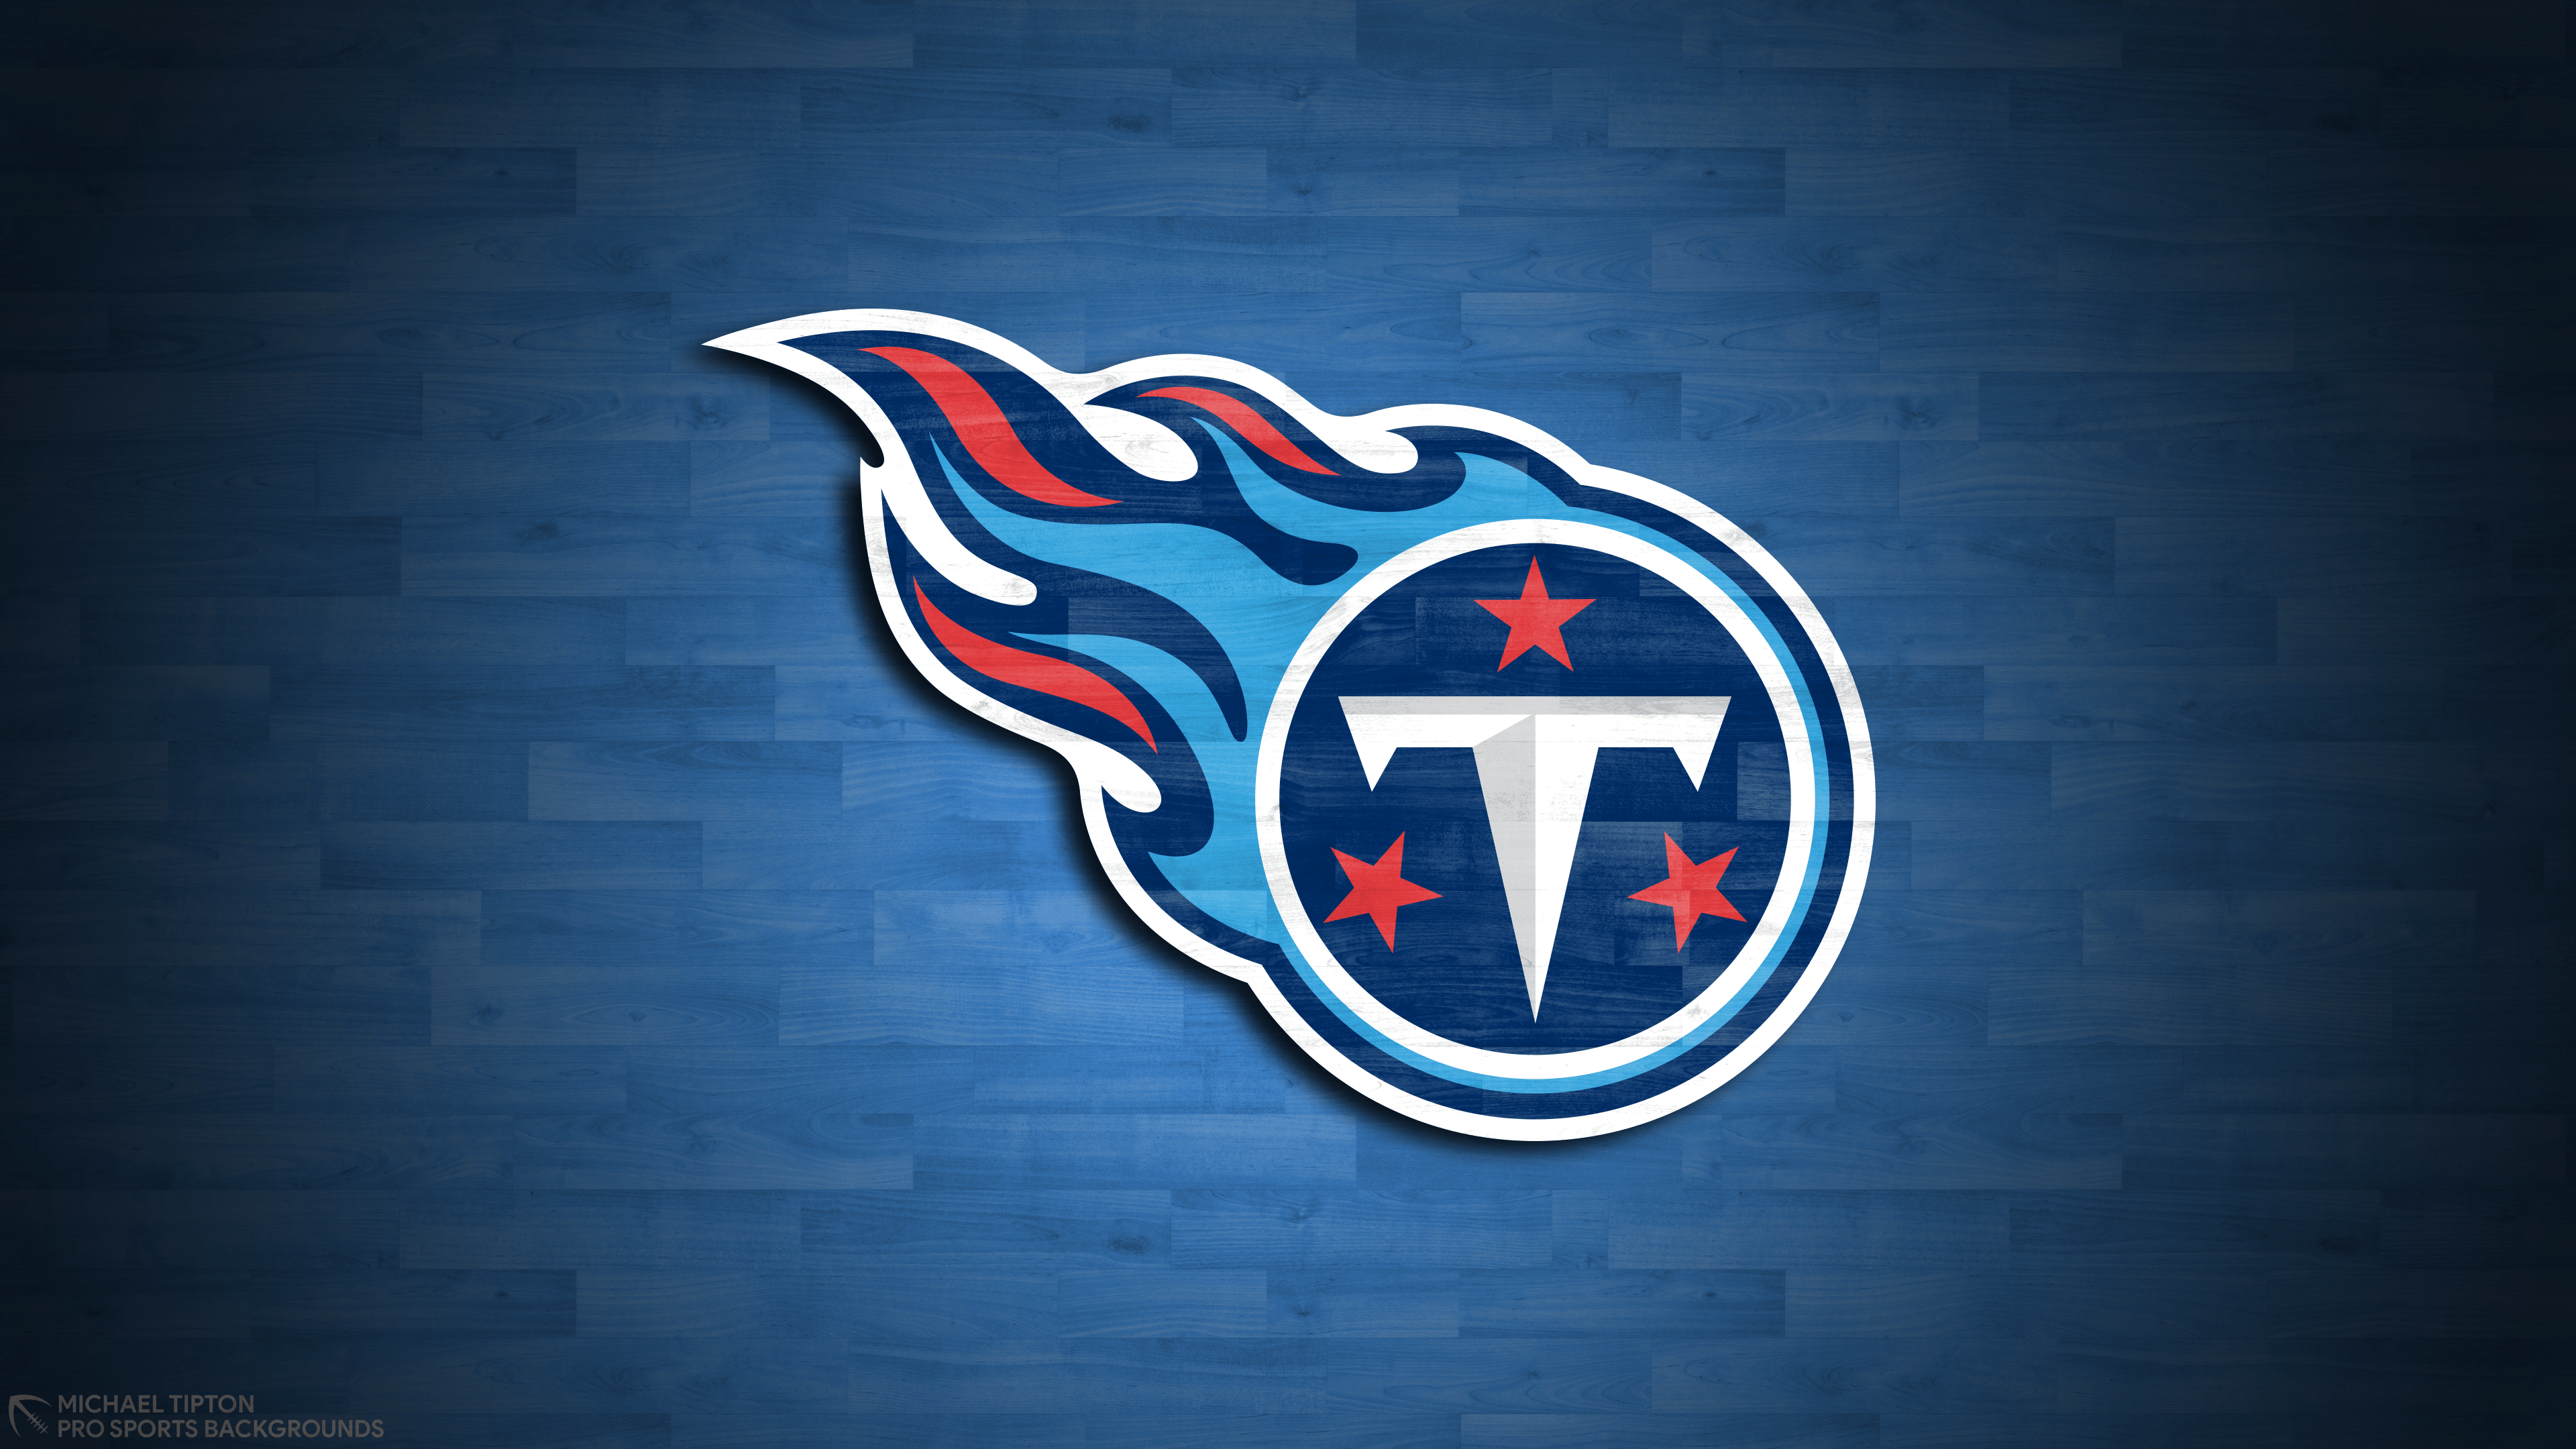 Tennessee Titans Wallpaper. Pro Sports Background